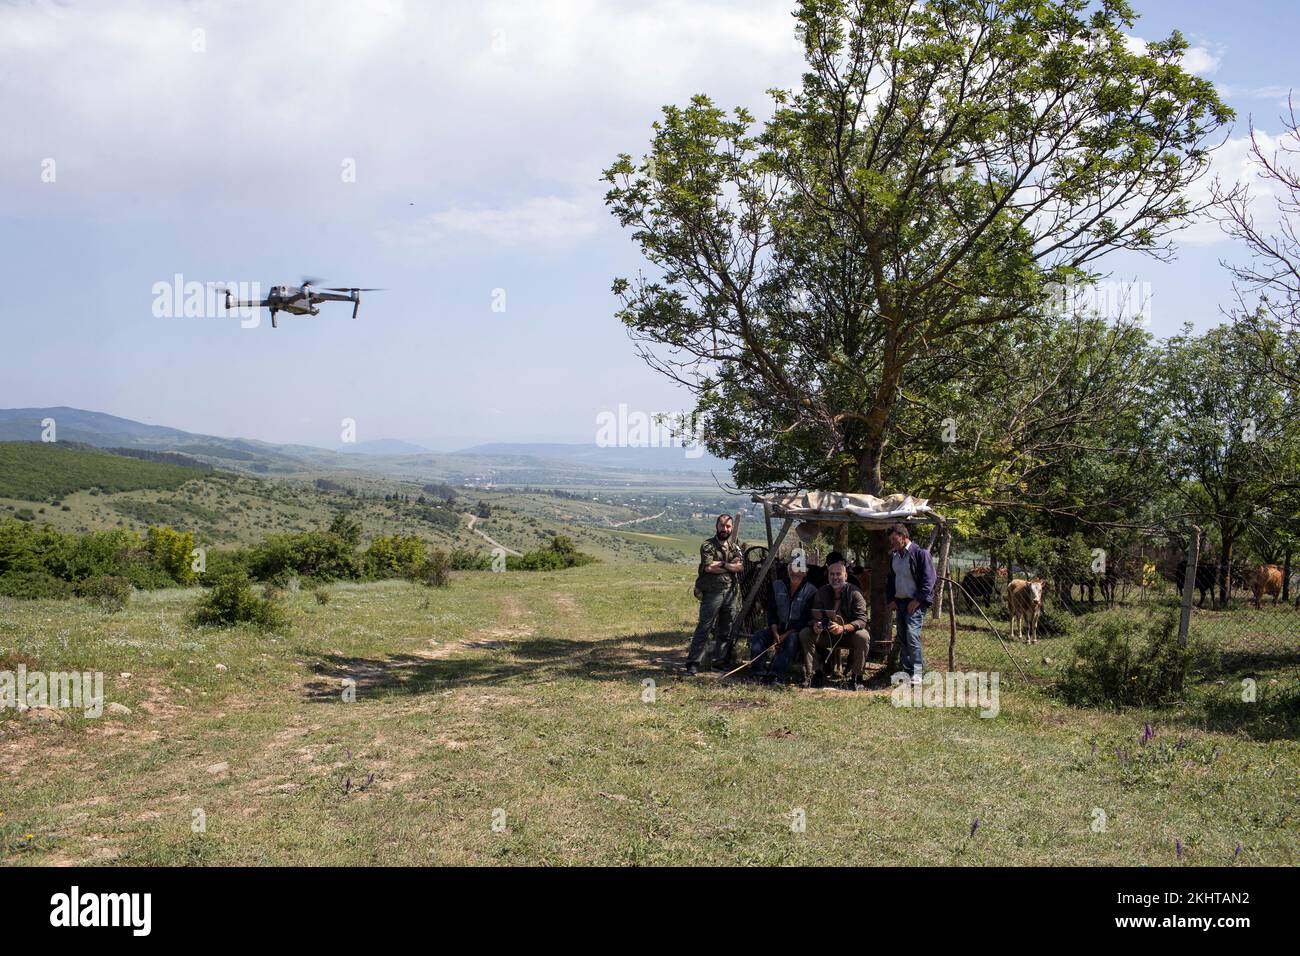 Georgian 'anti-occupation' activist David Katsarava, the leader of the group 'Power is in Unity', and his team patrol an area with a drone, where Katsarava said a local had been kidnapped and later released, near the border of Georgia's breakaway region of South Ossetia, near Karkushaani village, Georgia, June 15, 2021. Katsarava hands out GPS trackers to shepherds and other residents to locate them rapidly if they run into trouble on the frontier so they can refute claims they have flouted it. He says Georgia has already lost tracts of land beyond the territory it initially lost control of. ' Stock Photo